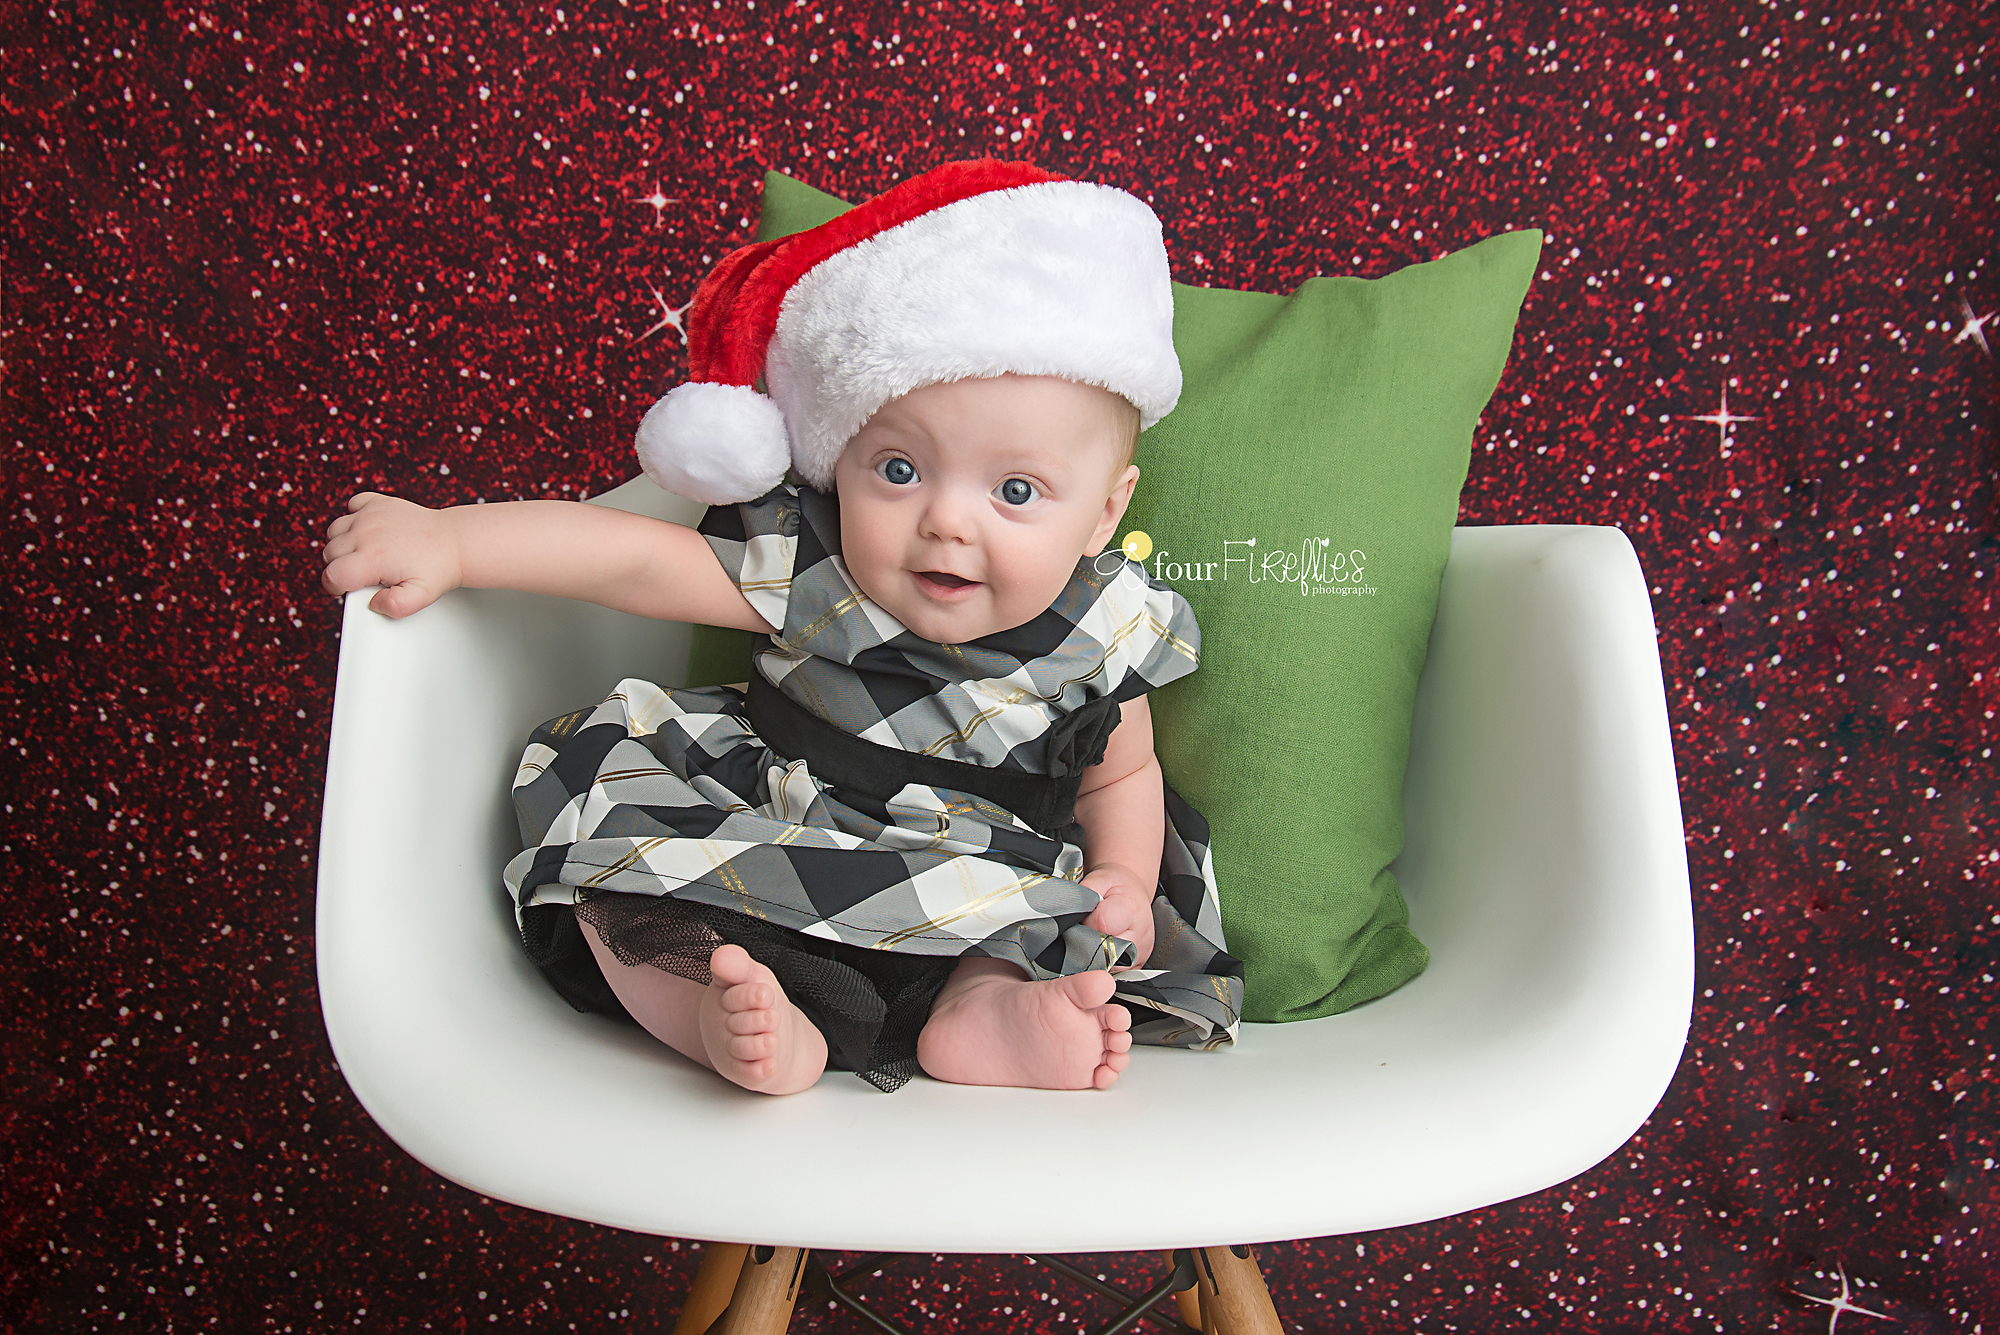 st-louis-baby-photographer-christmas-baby-in-plaid-dress-and-santa-hat-on-white-chair-with-green-pillow-and-red-glitter-backdrop.jpg